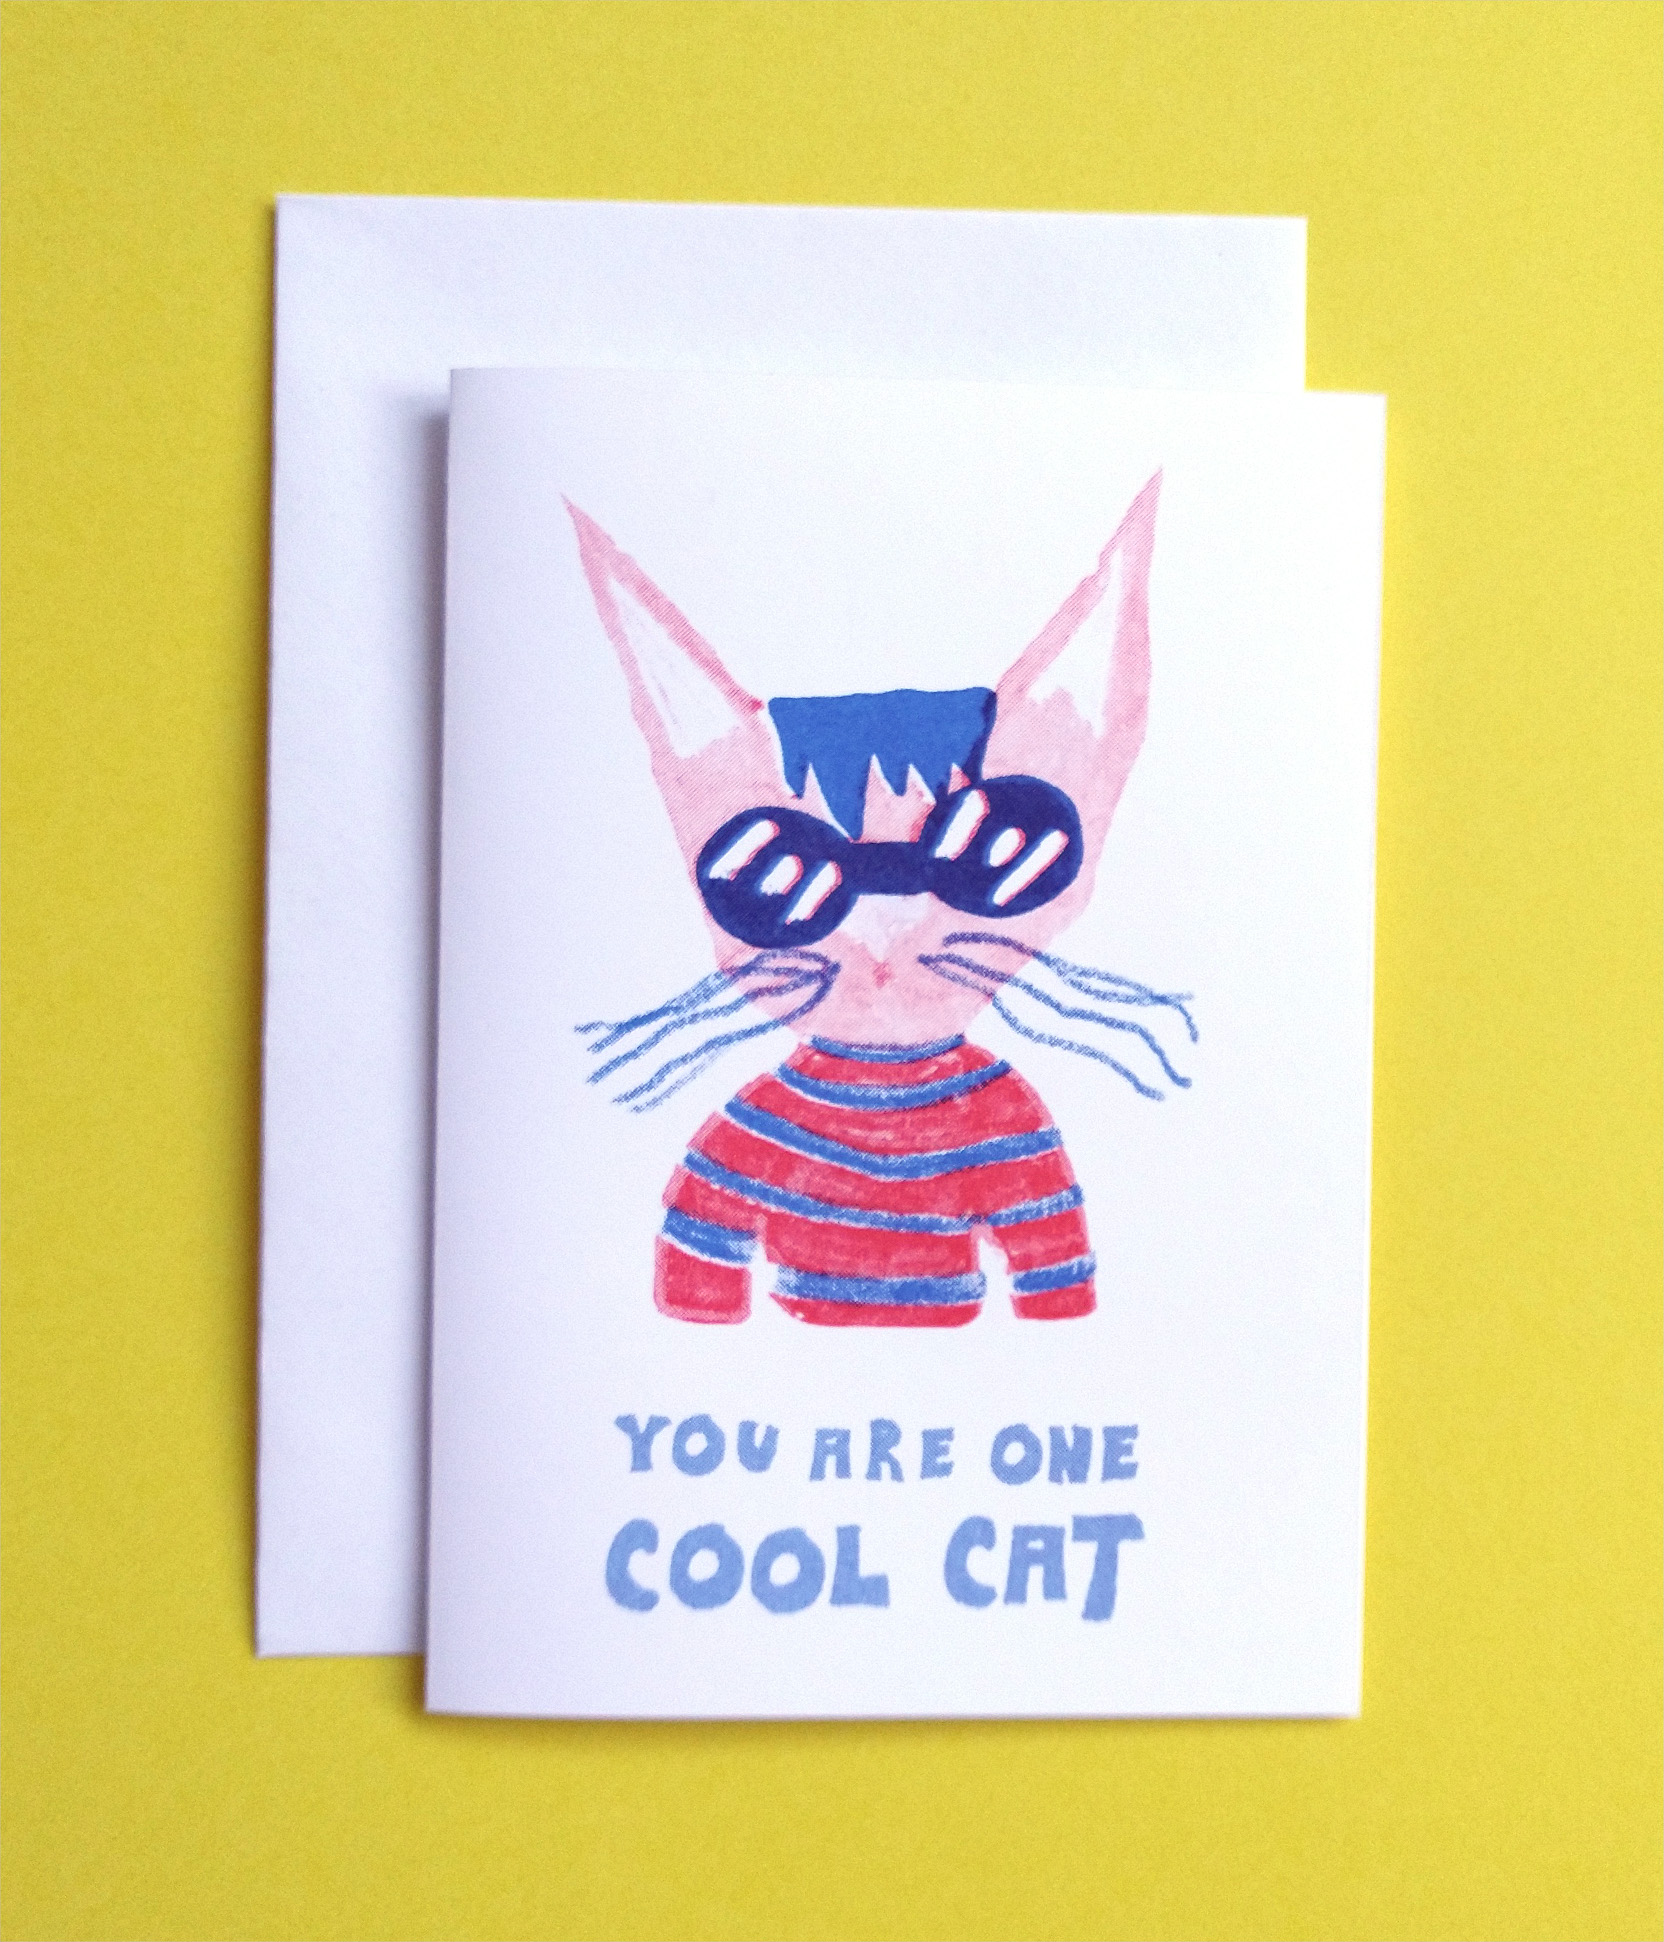 You are One Cool Cat Riso-Printed Greetings Card by Bobbi